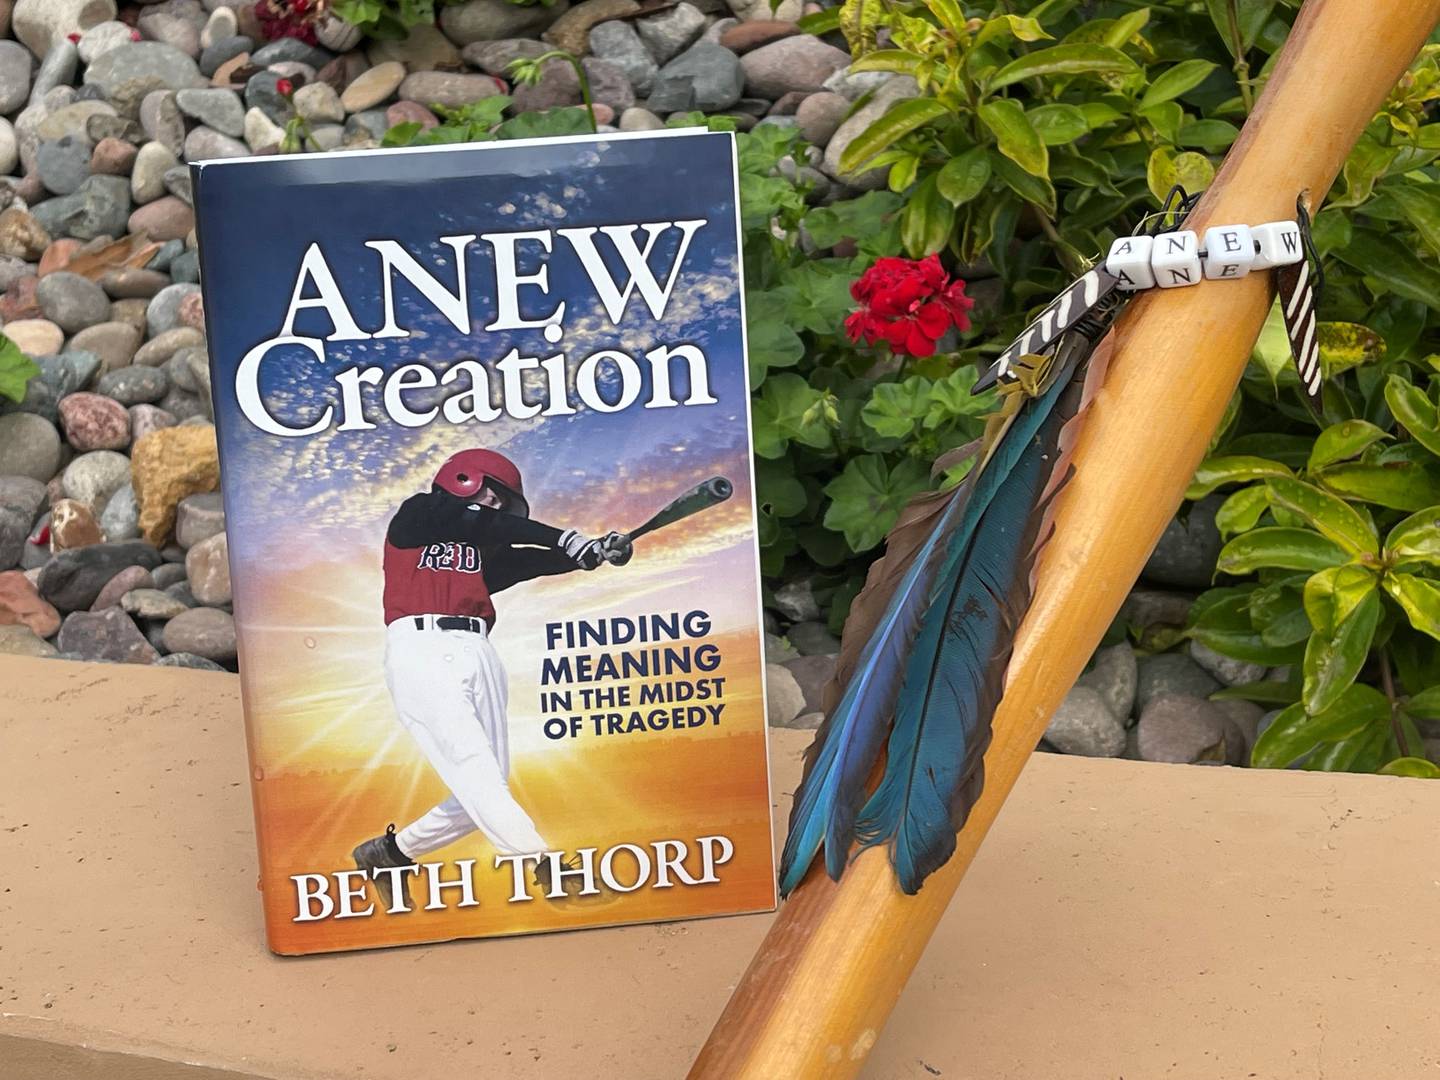 Beth Thorp's new book ANEW Creation: Finding Meaning in the Midst of Tragedy released in June 2022 details the mystery and heartache of her son Mitchell Thorp's undiagnosed illness that led to his death.